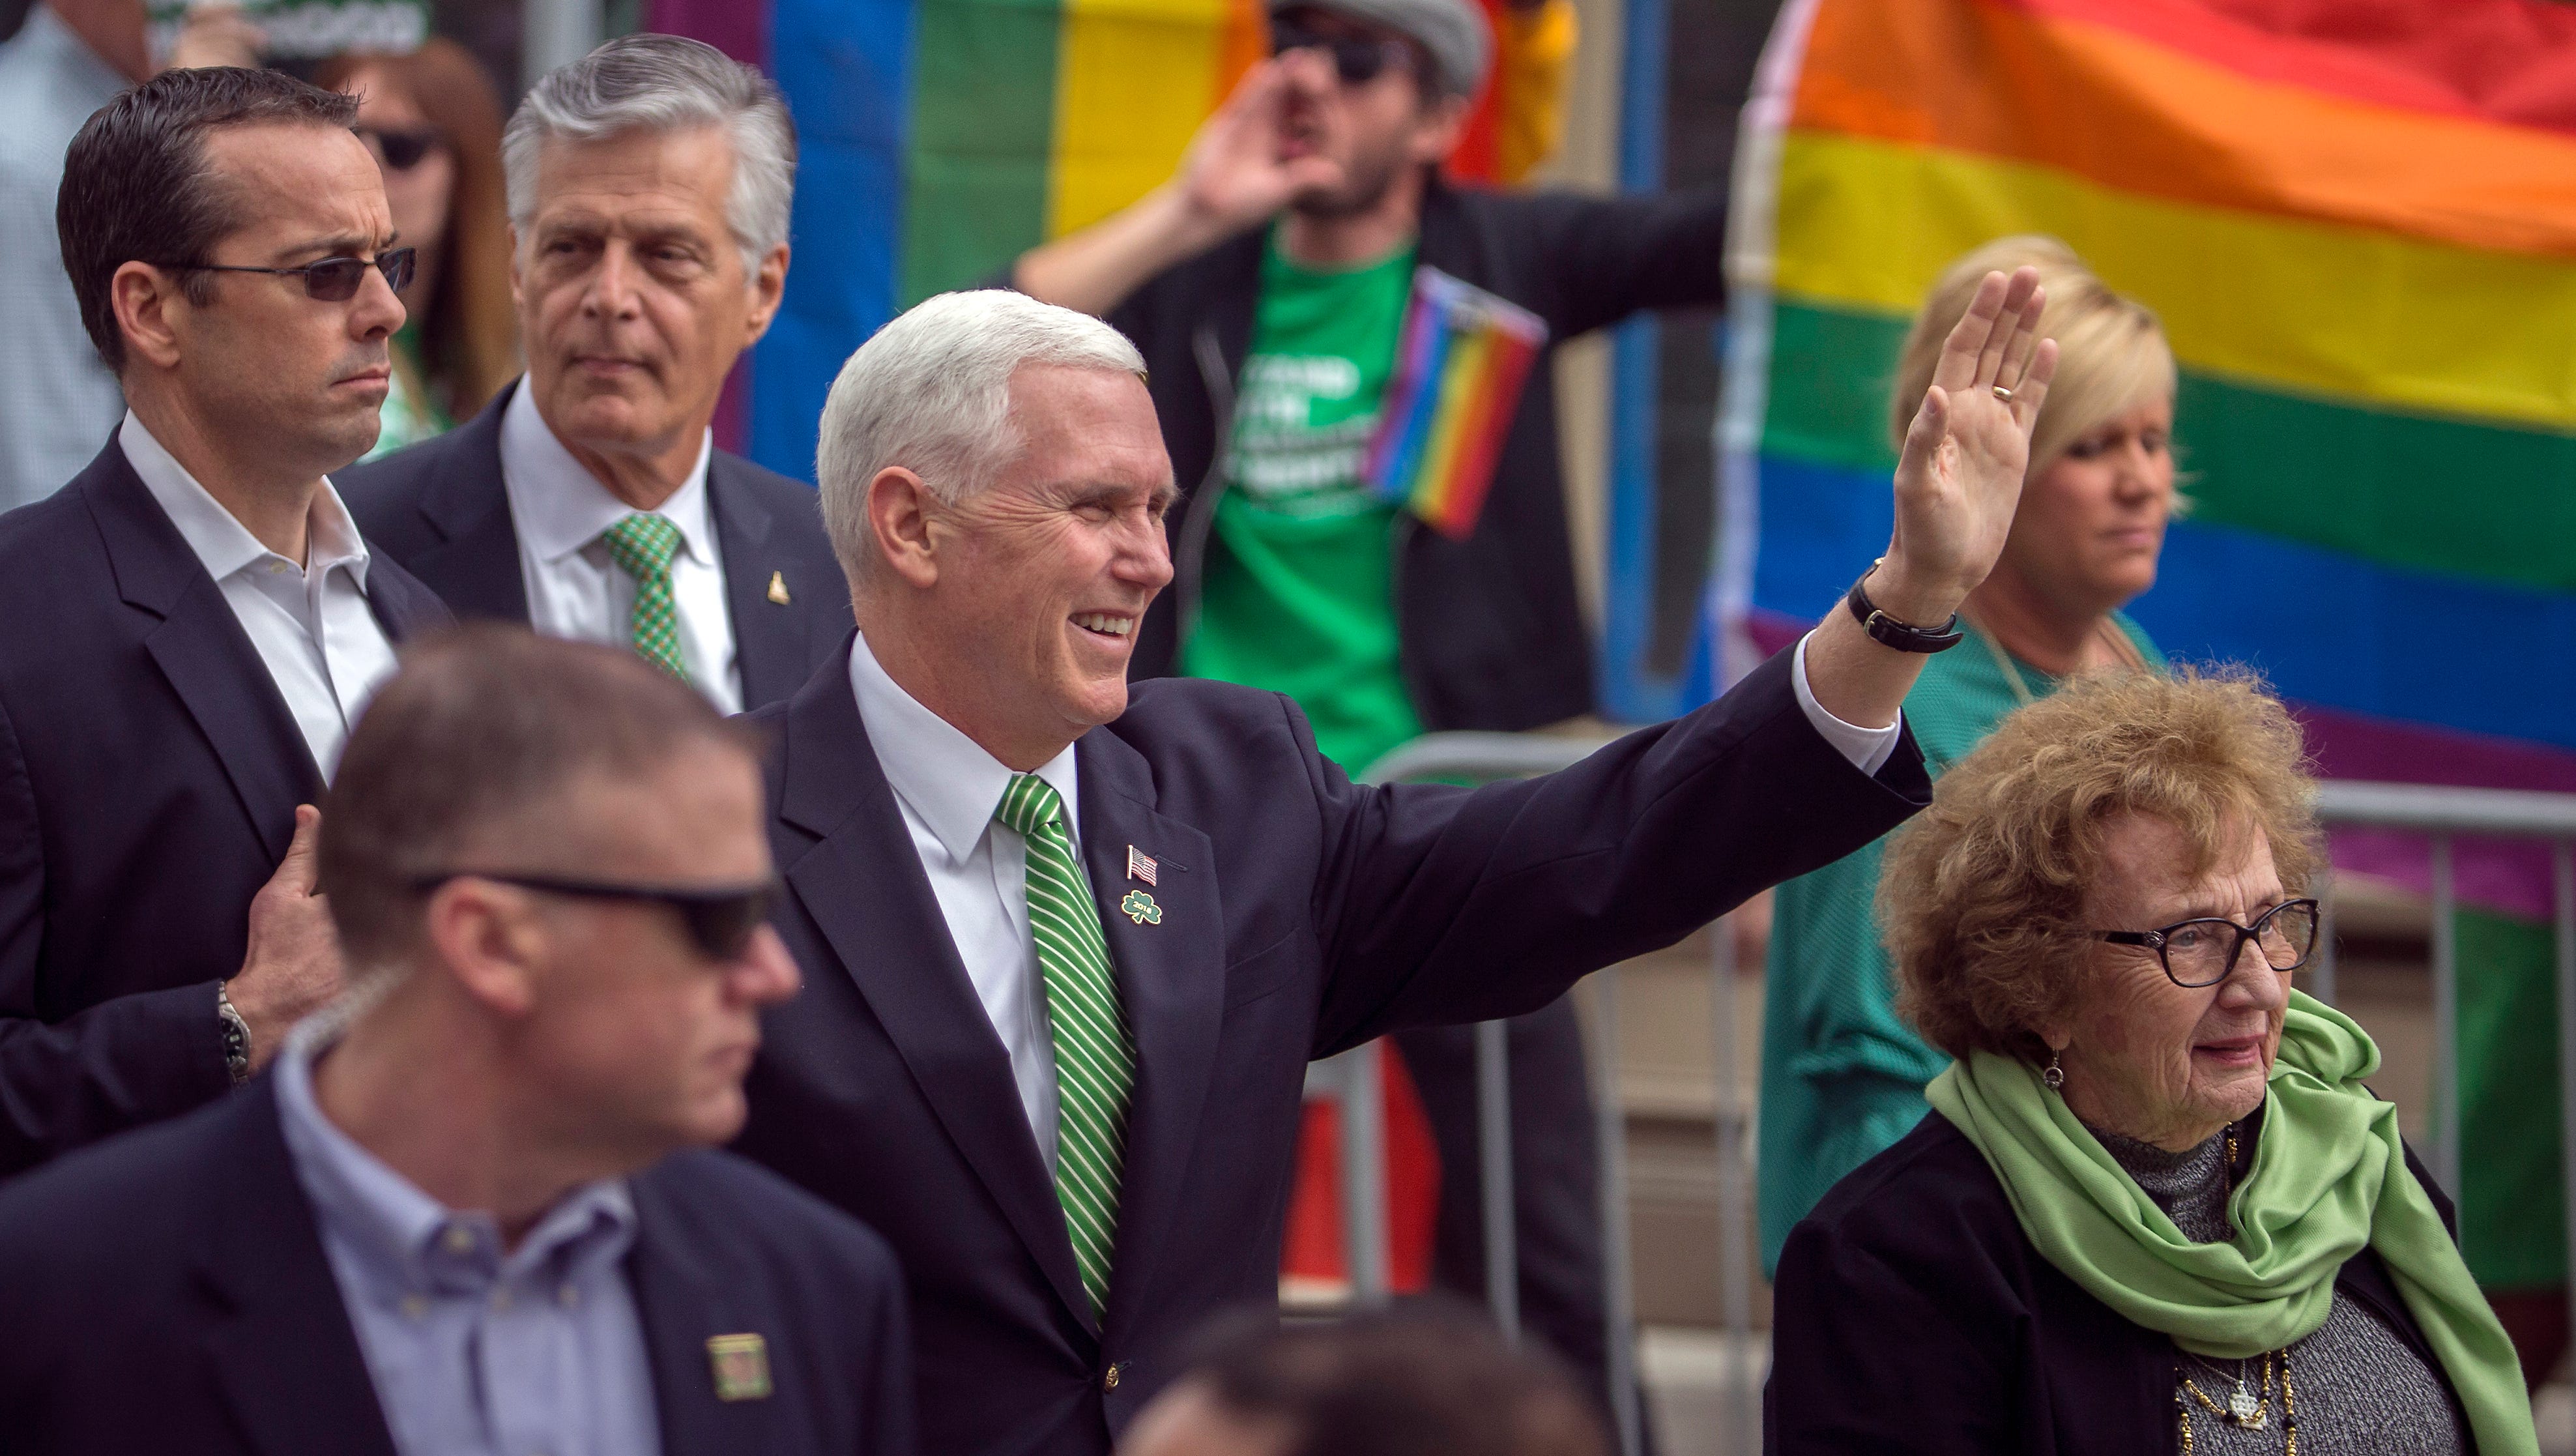 Mike Pence's hometown to host gay pride festival